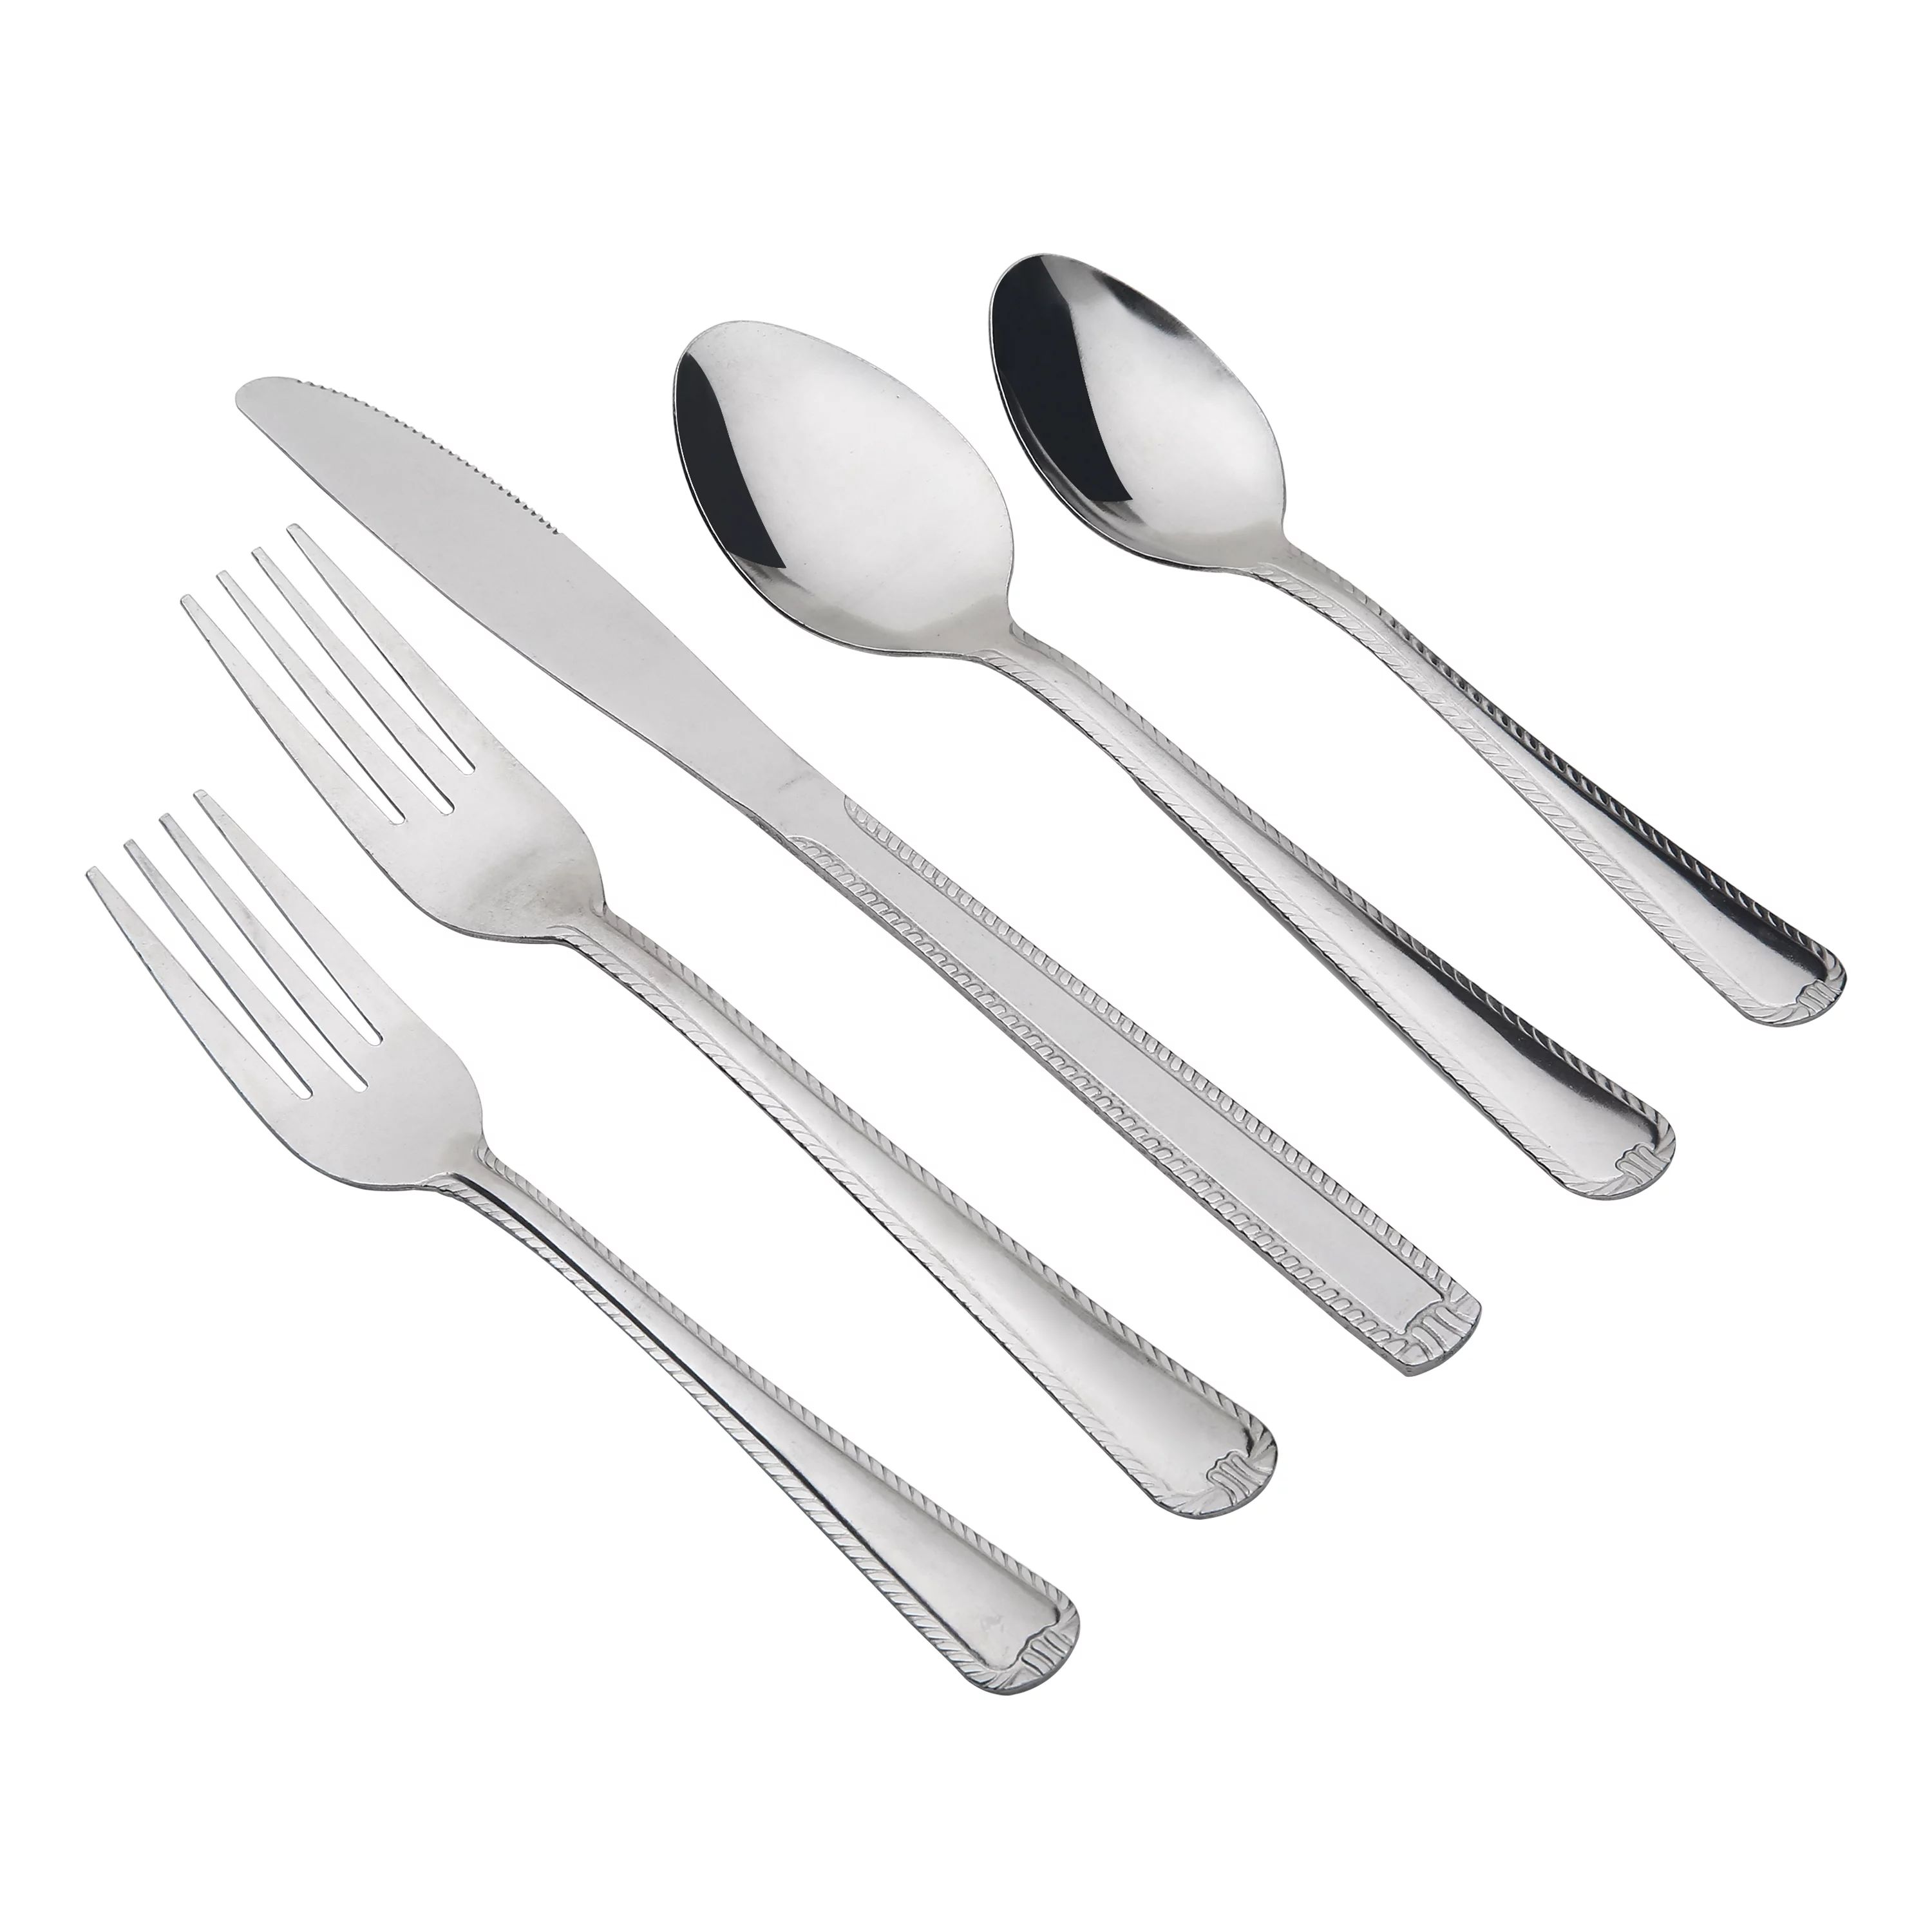 Mainstays 49-piece Lace Stainless Steel Flatware Set with Tray Organizer, Silver Tableware - Walm... | Walmart (US)